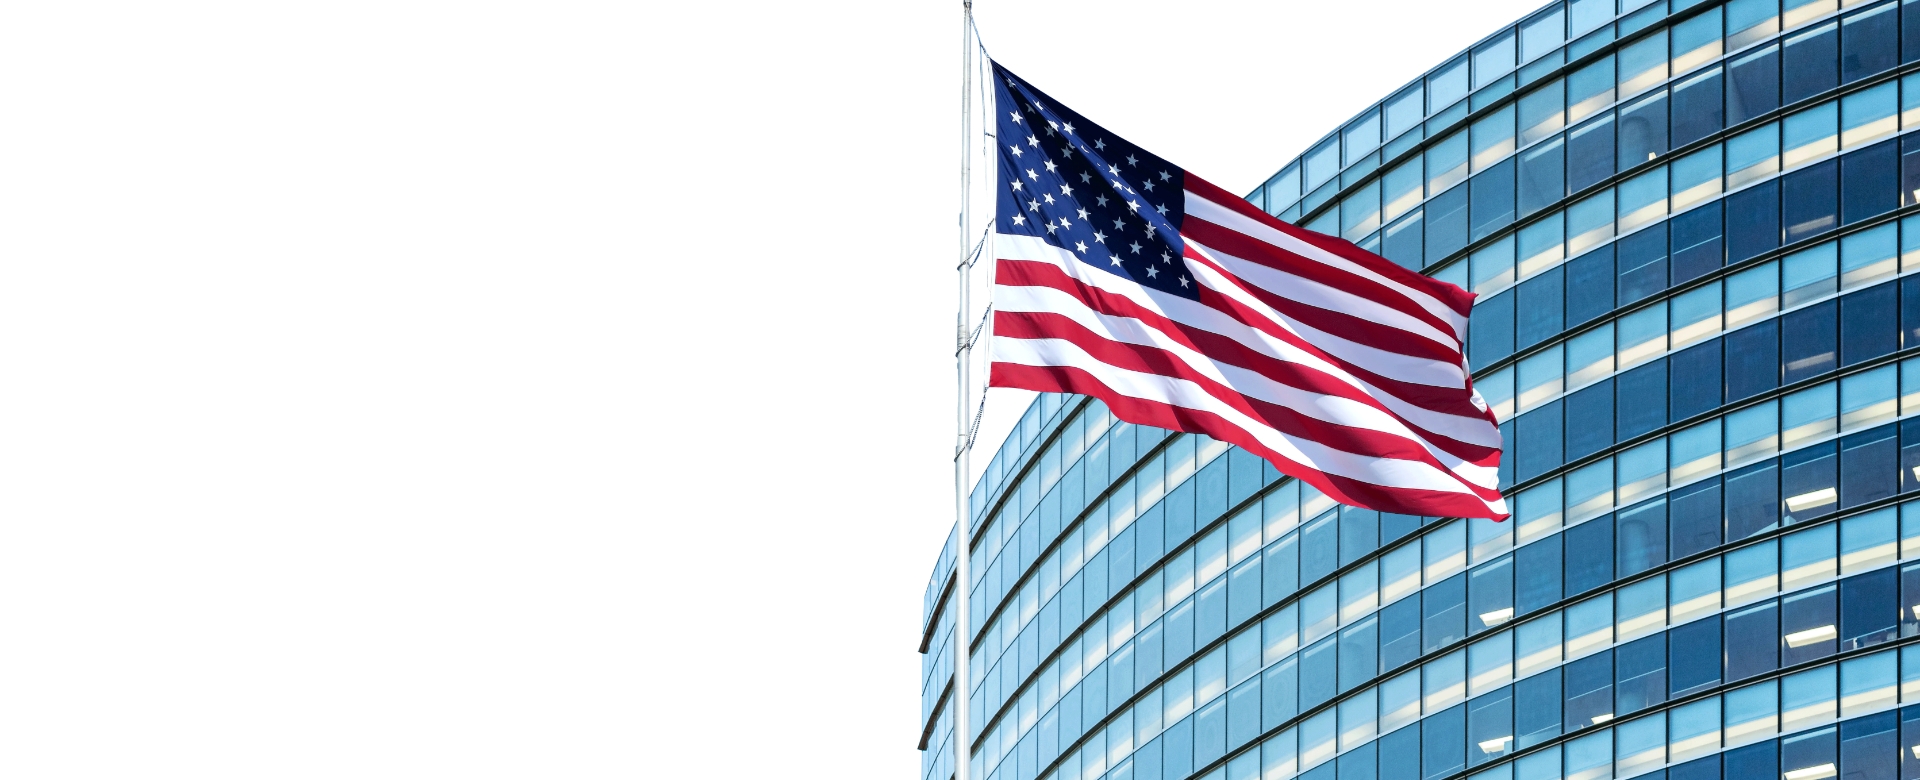 A modern looking receivership building with an American flag in front of it